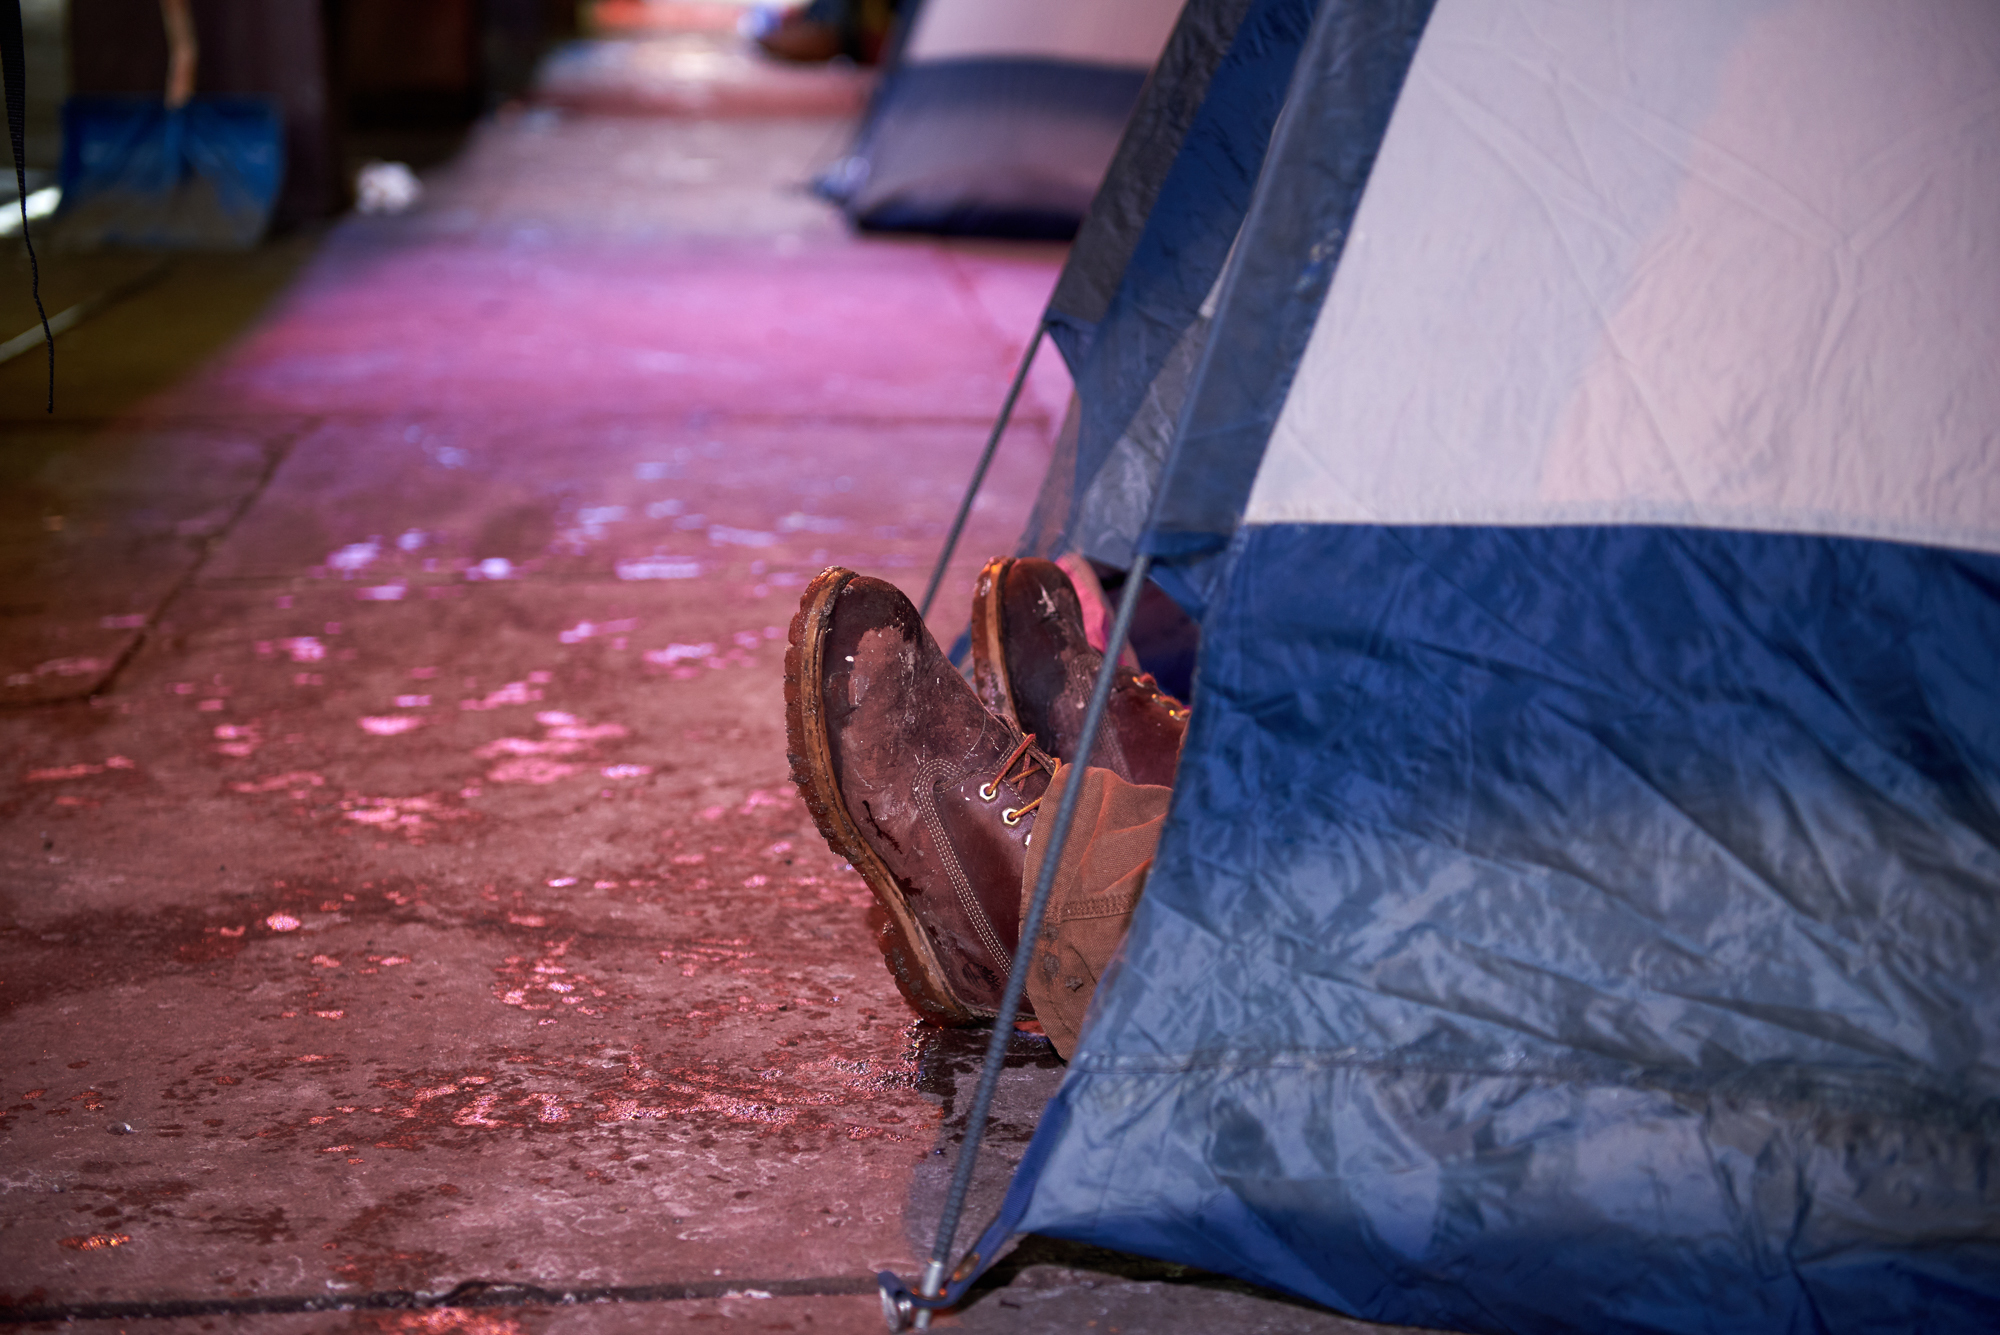 Proponents of medically supervised, indoor sites for opioid injection say such places would be much safer than tent encampments like this one — and could help people addicted to opioids transition into treatment and away from drug use. (Photo by Natalie Piserchio/WHYY)